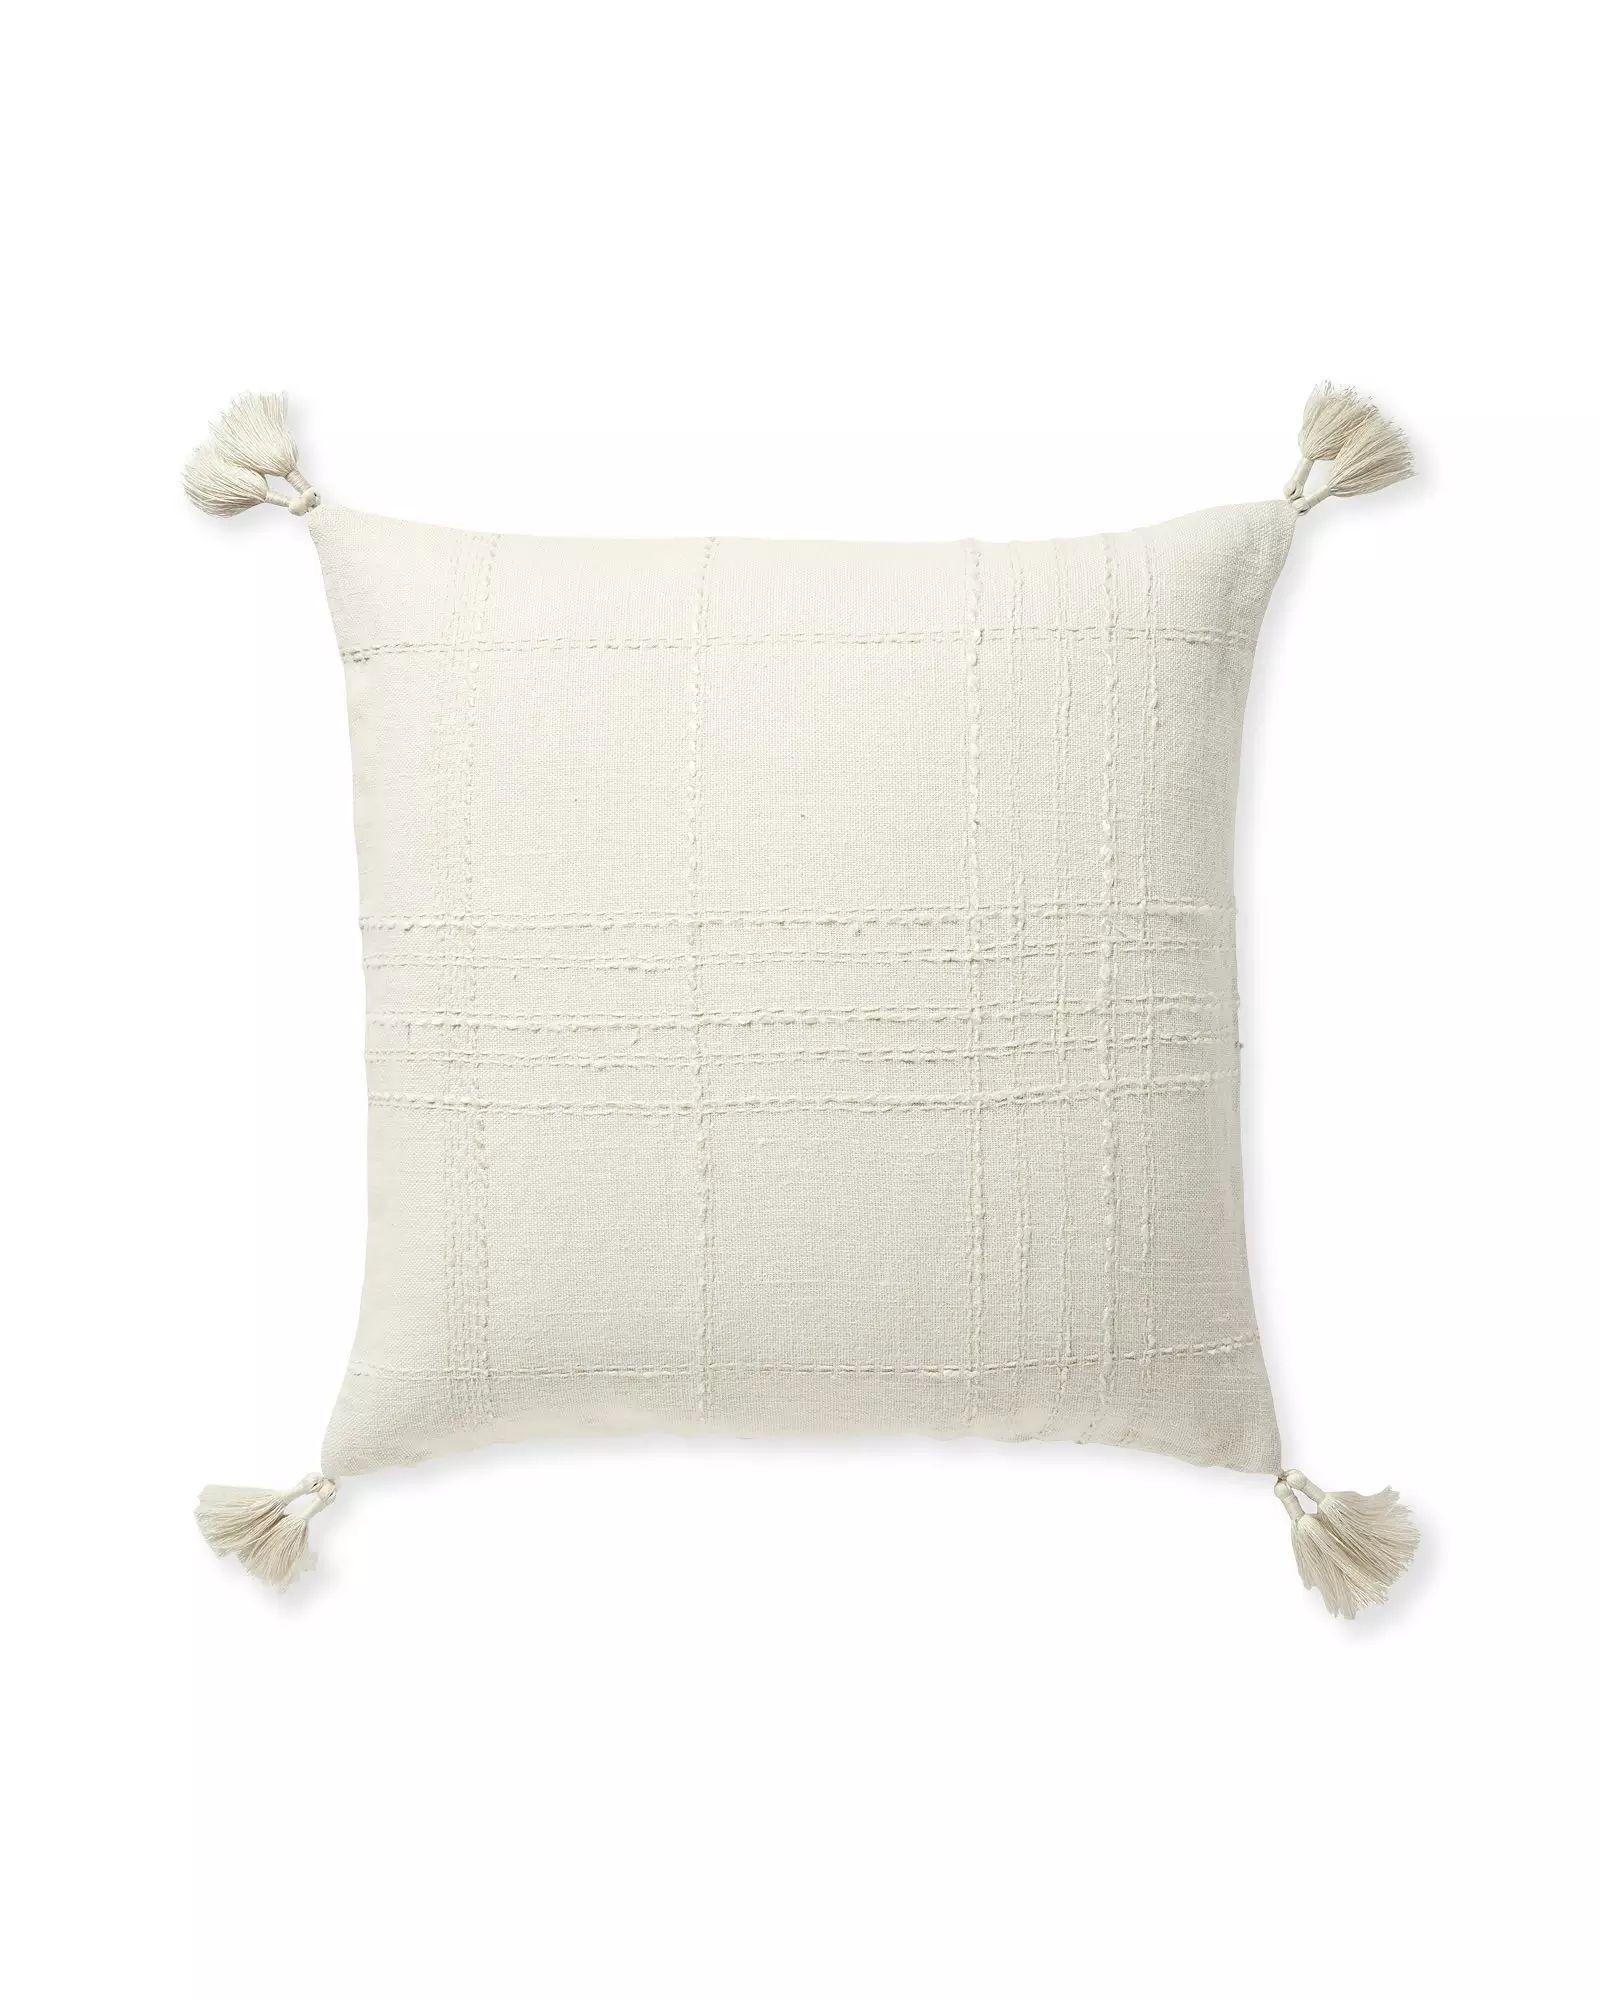 Asheville Pillow Cover | Serena and Lily